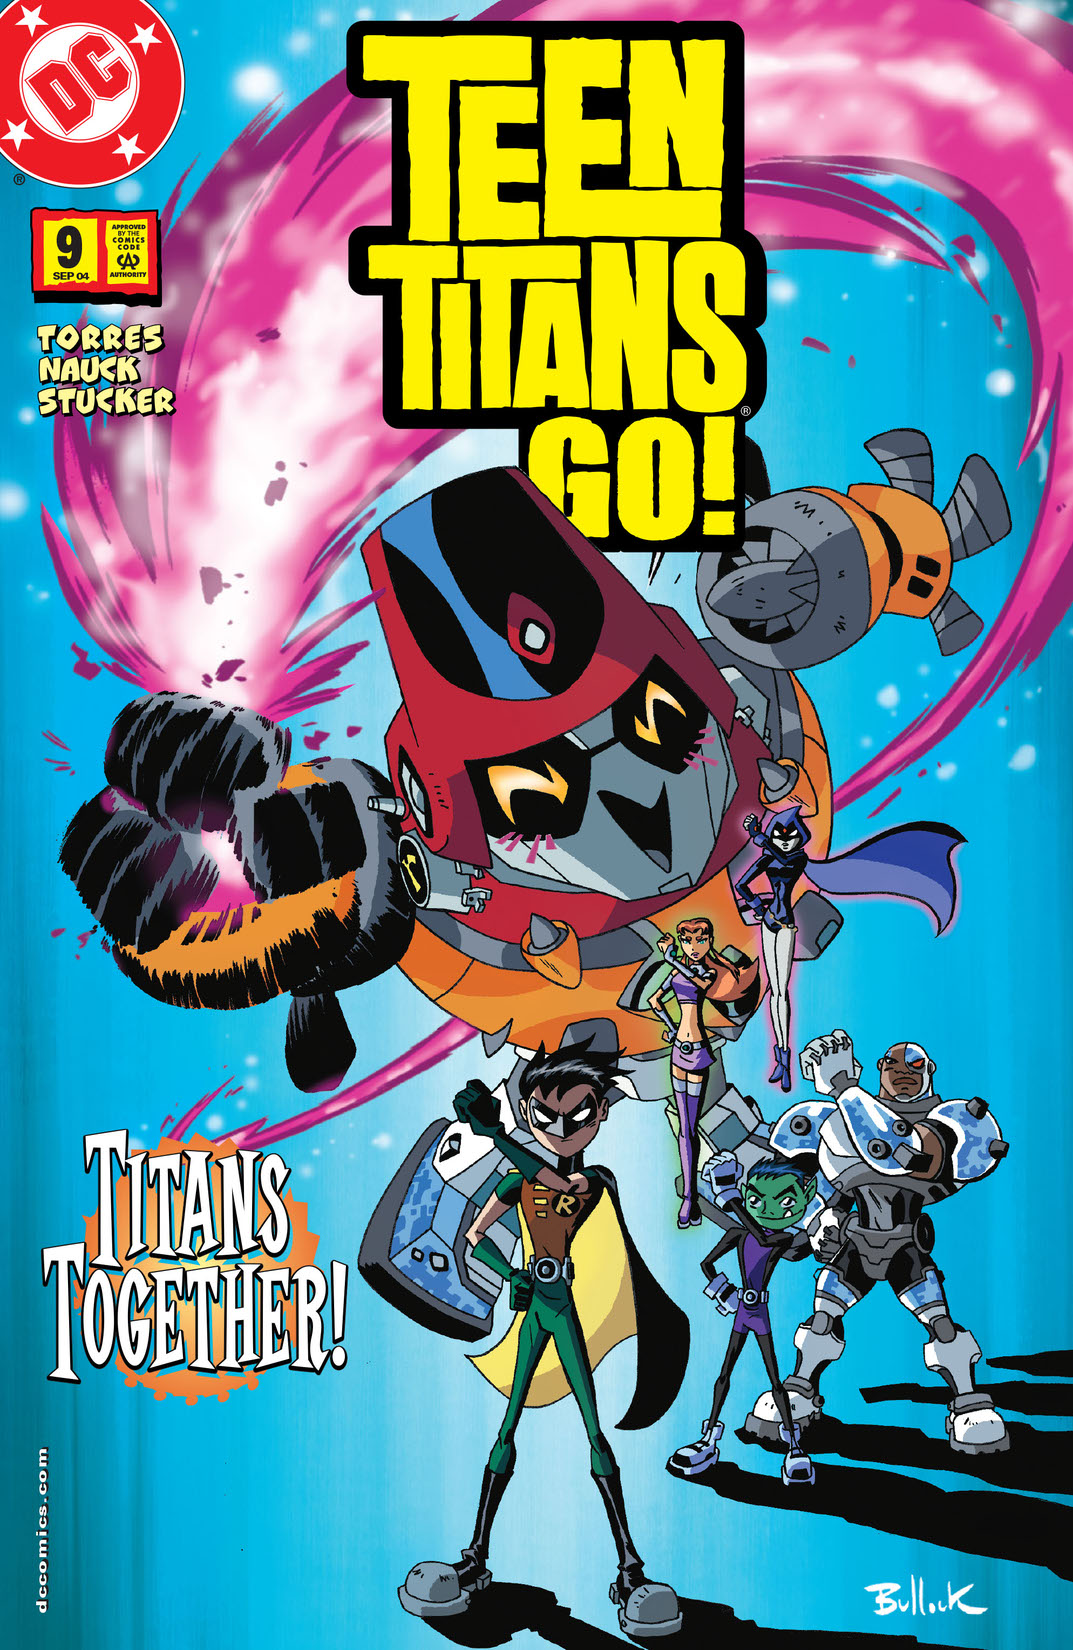 Teen Titans Go! (2003-) #9 preview images